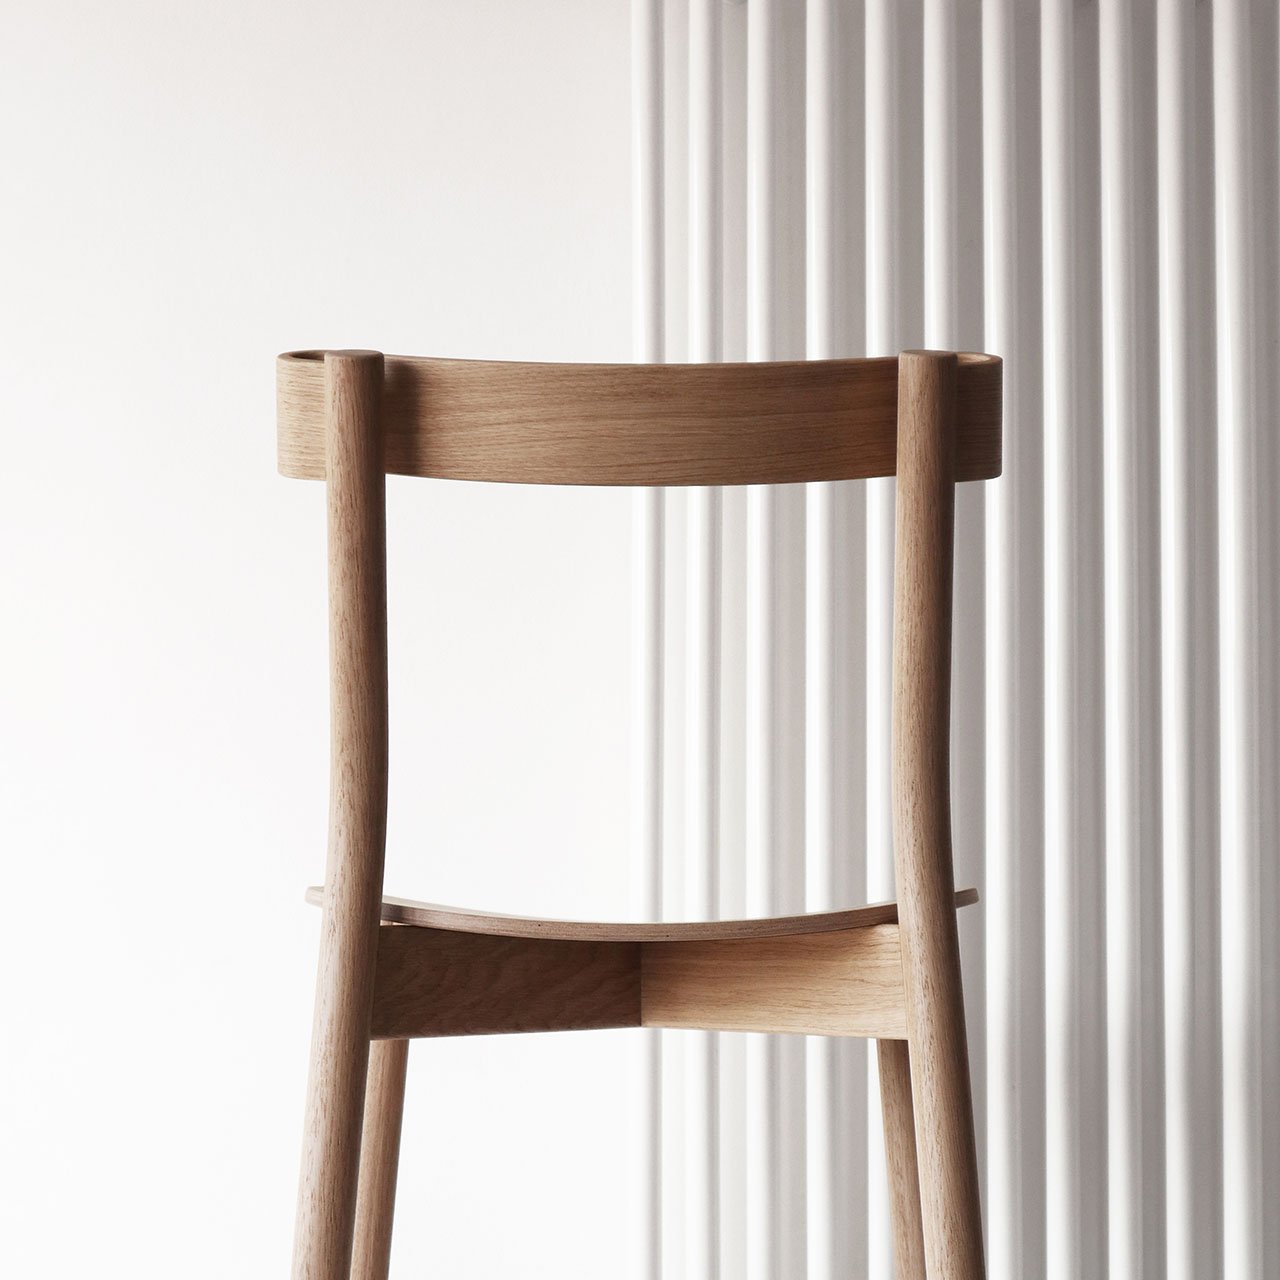 Still Life Chair by Marcel Sigel (LOCAL DESIGN).